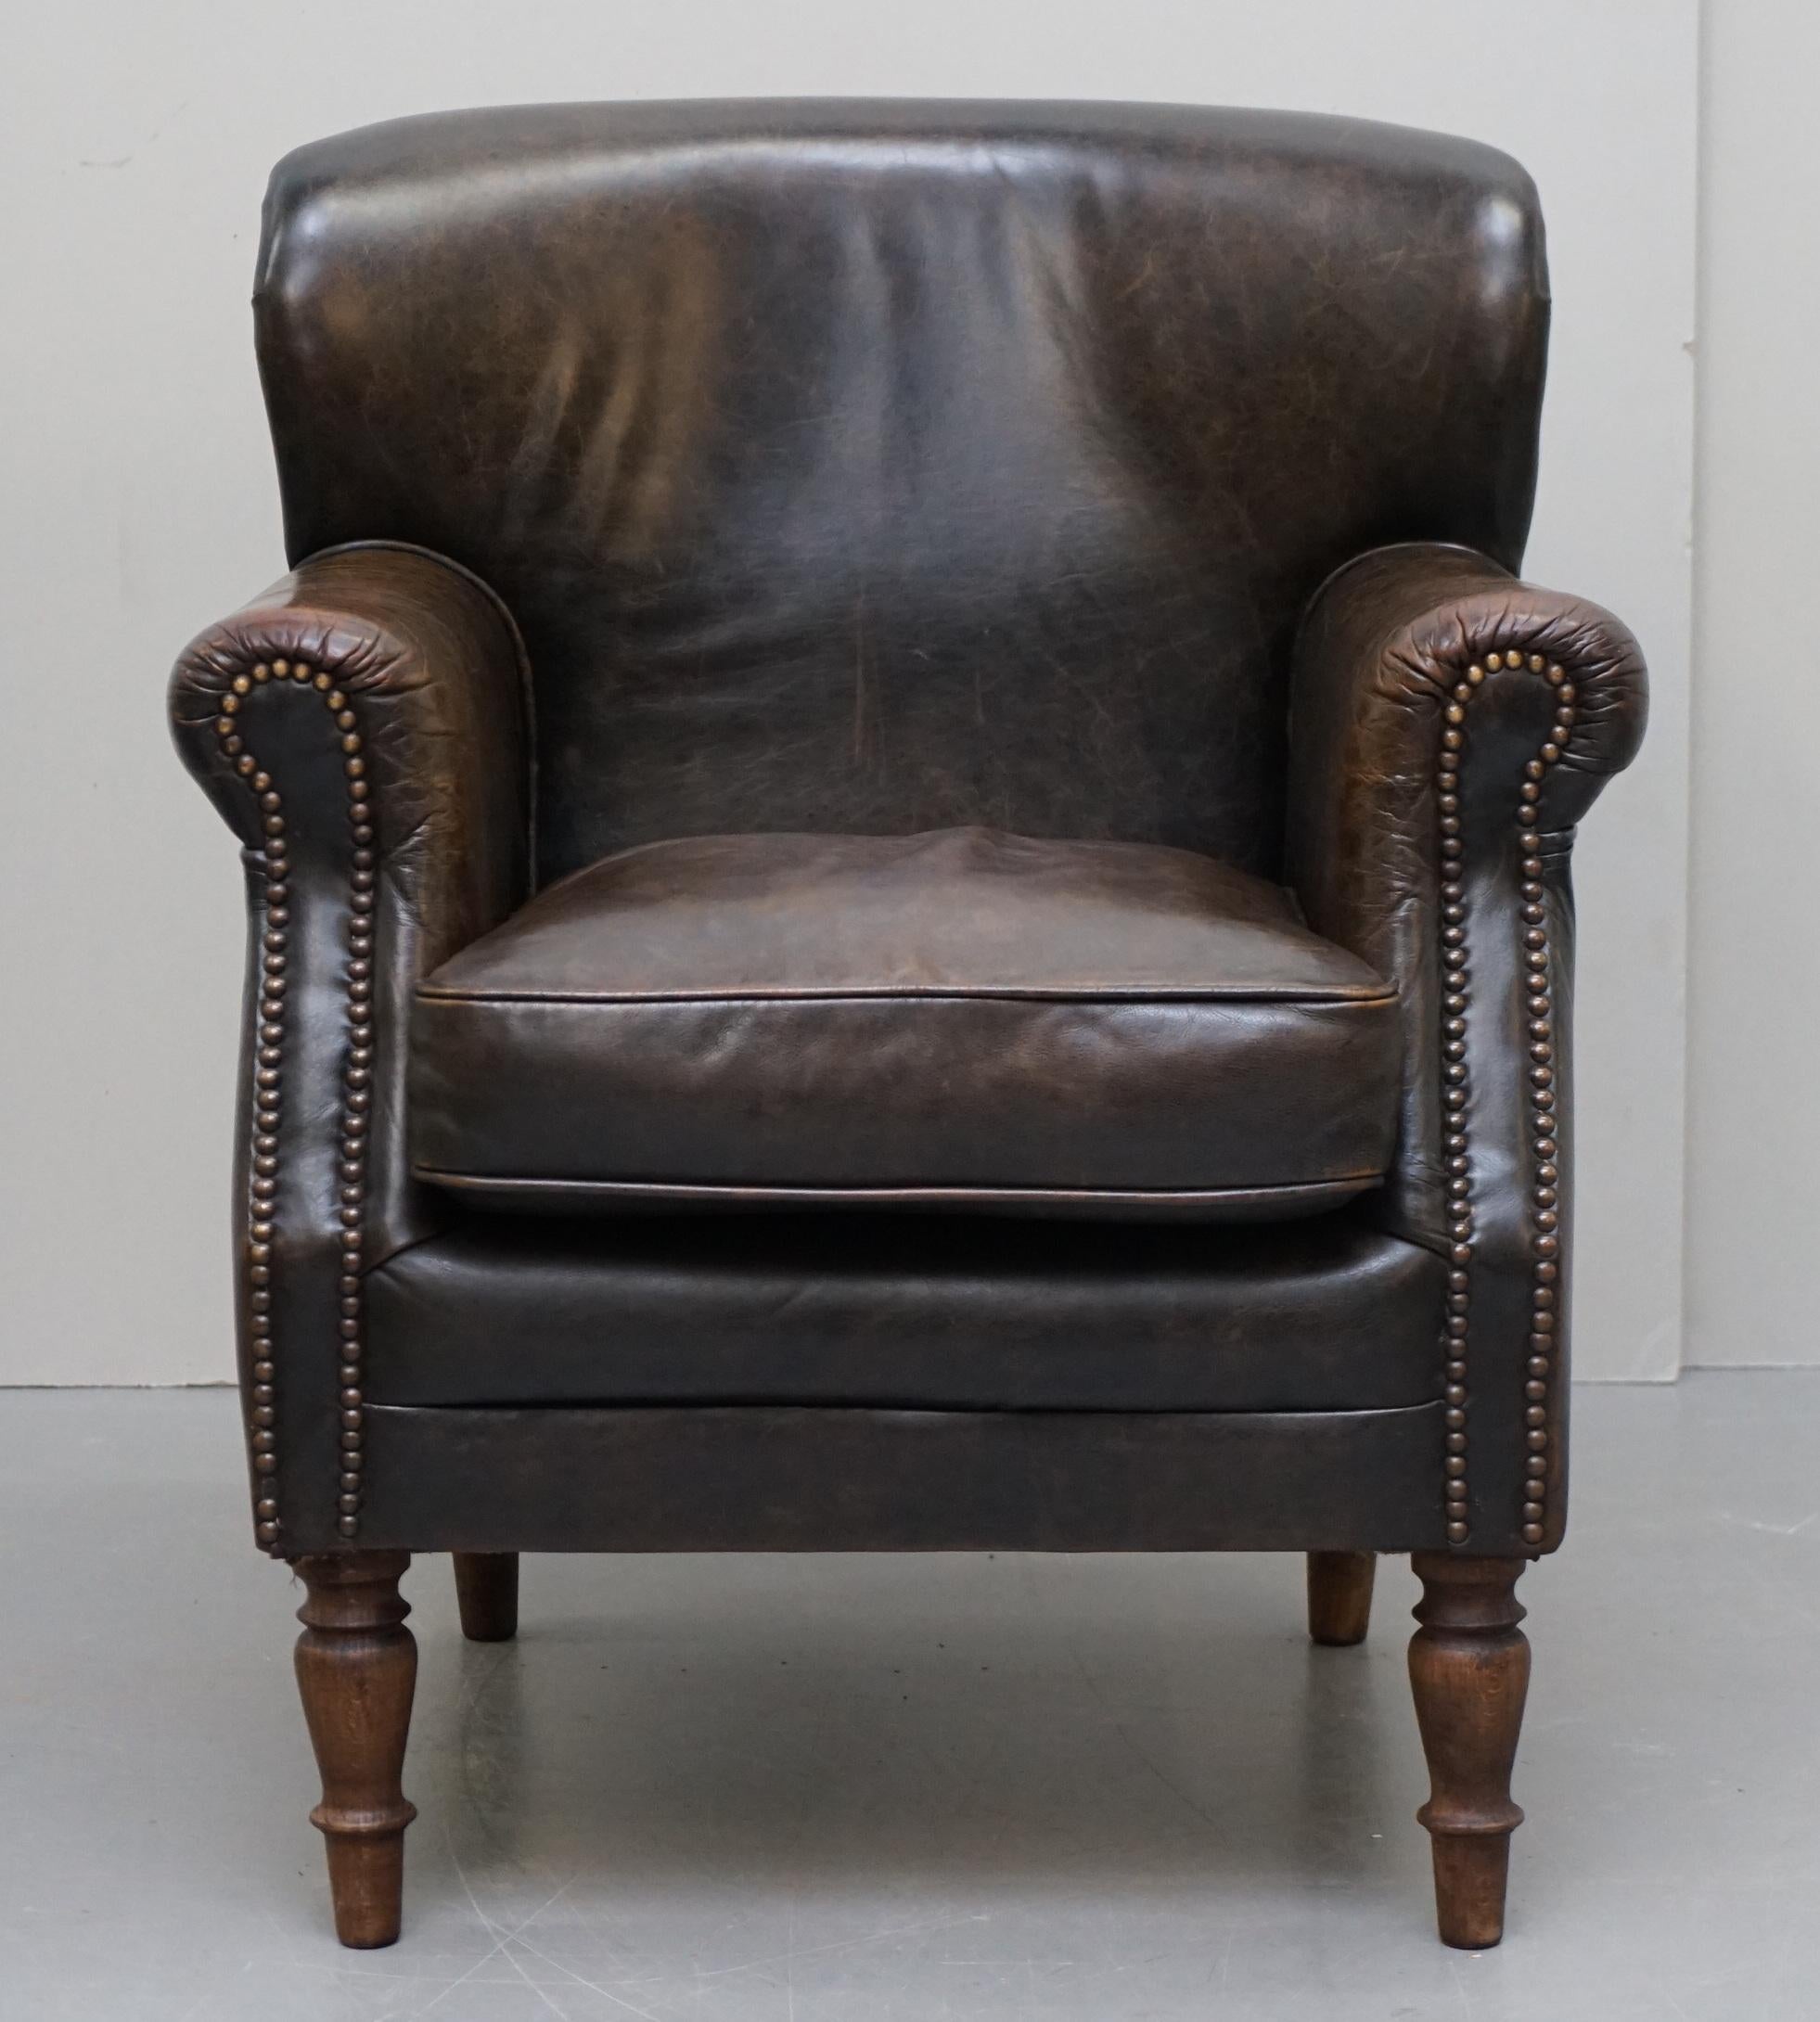 We are delighted to offer this lovely vintage heritage aged brown leather club armchair with elegant turn beech wood legs

They are all in very nice vintage order, the legs have been custom made with 12mm threaded axels so they can be unscrewed